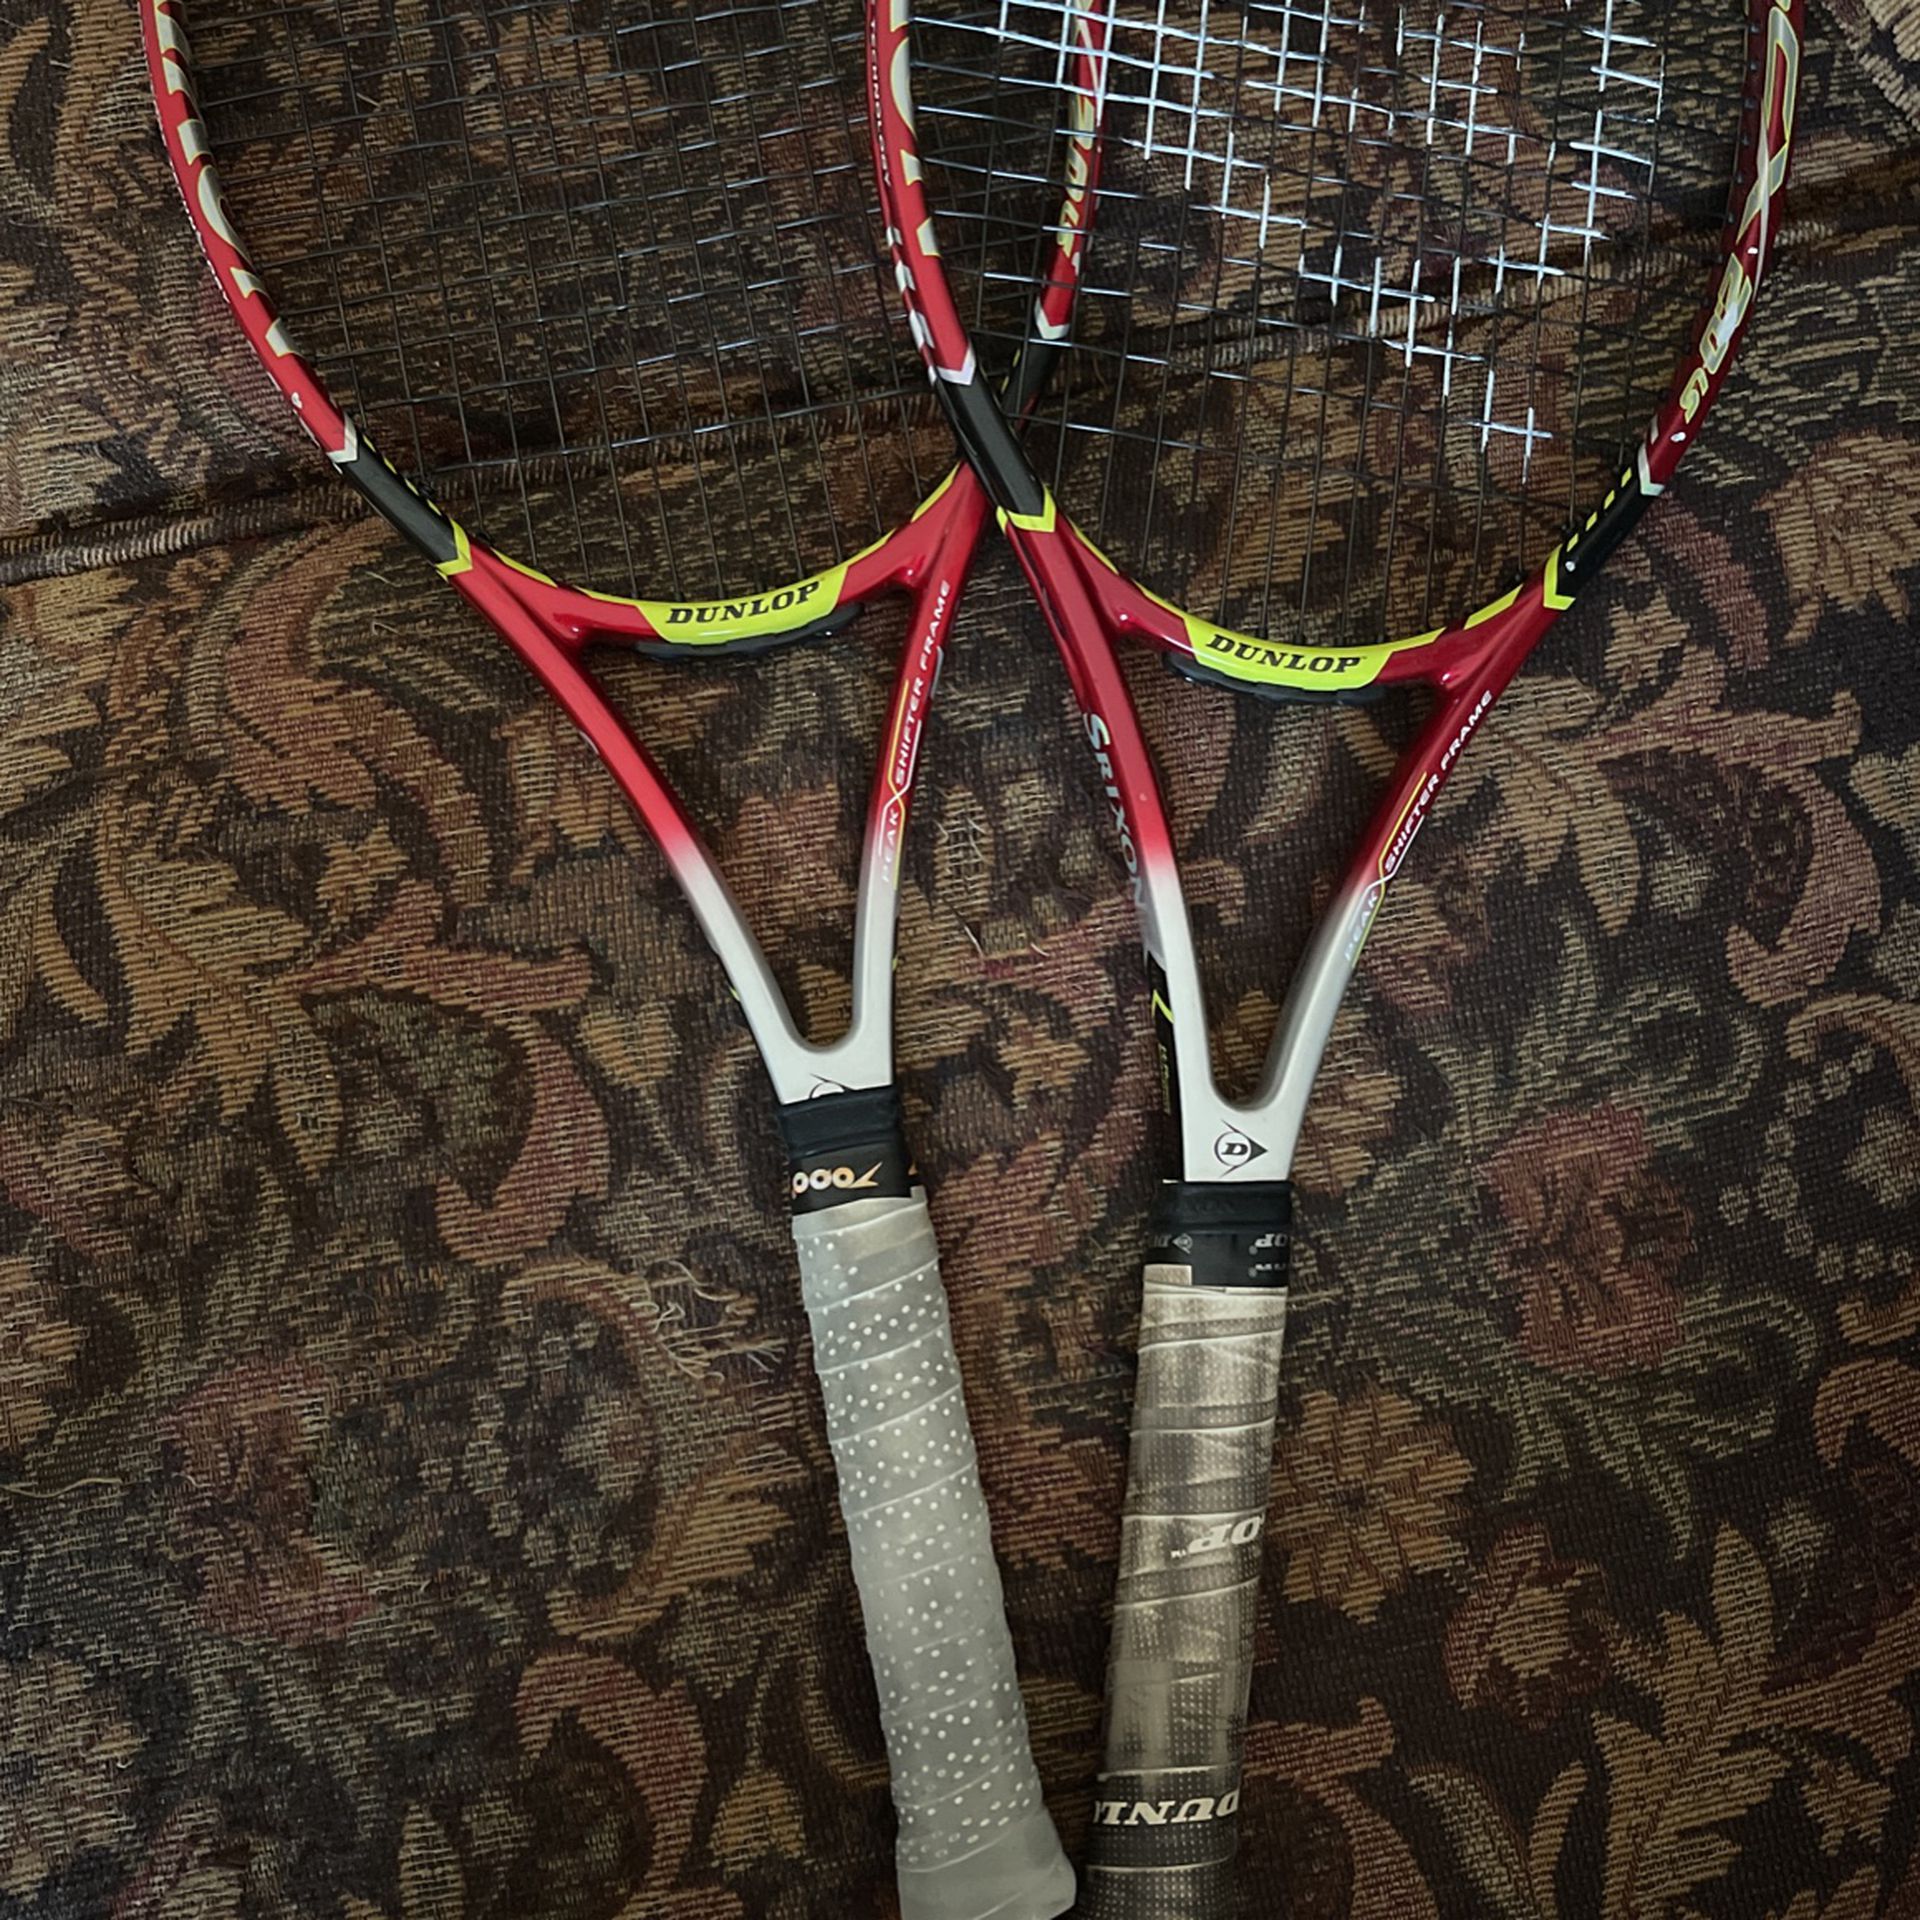 3 Dunlop Rackets For Sale 